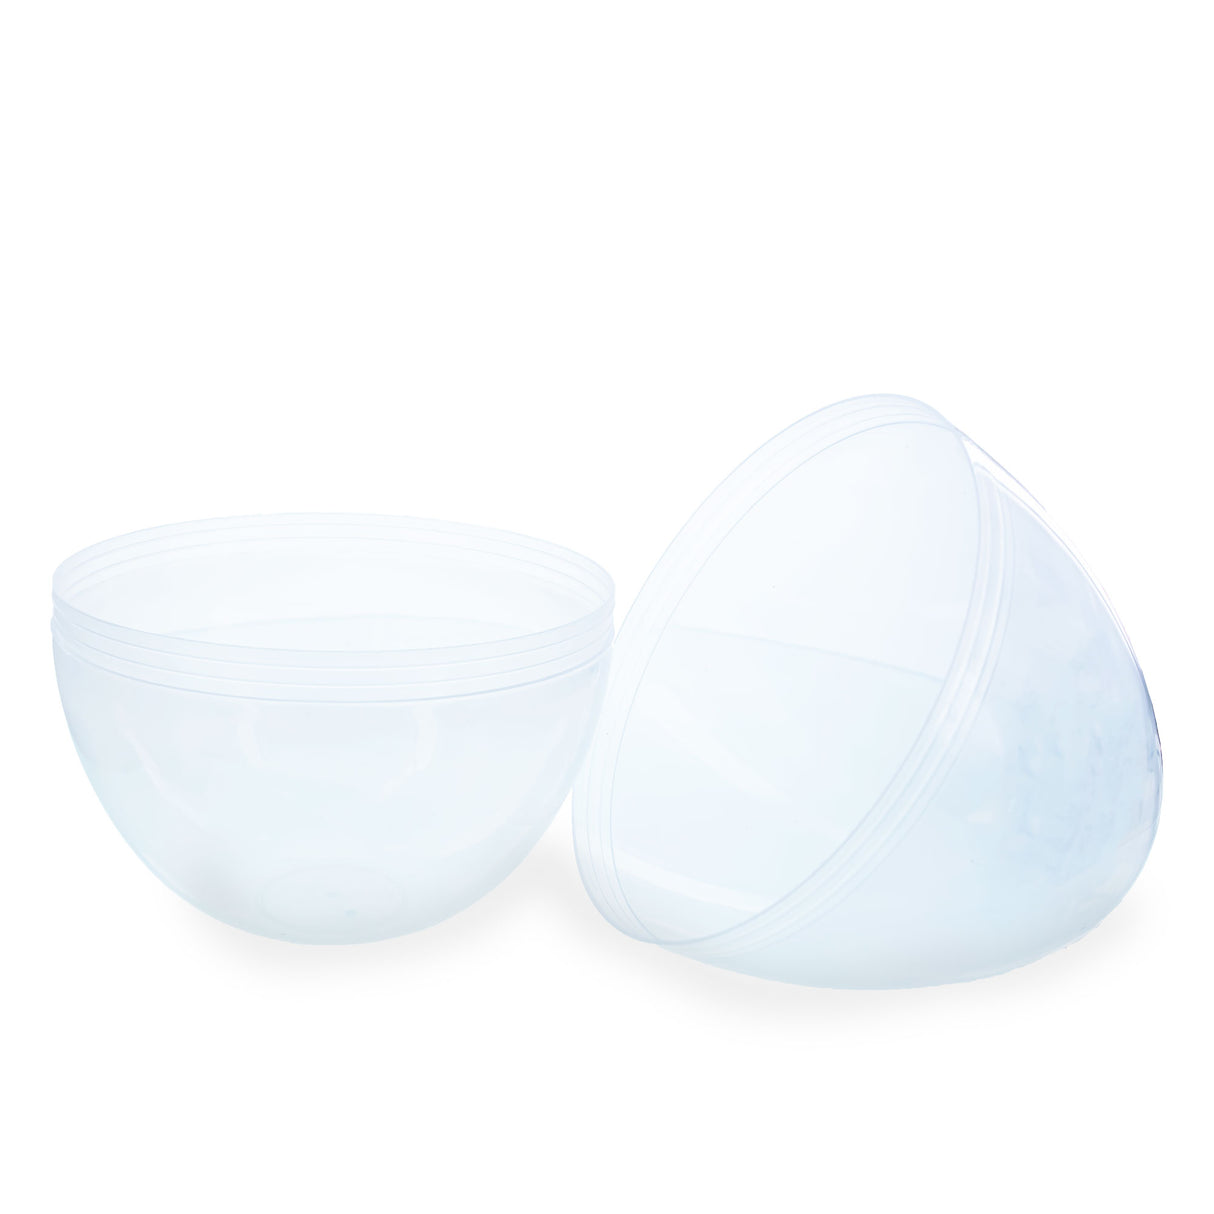 Set of 2 Giant Transparent Jumbo Size Clear Plastic Easter Eggs 10 Inches ,dimensions in inches: 10 x 6.3 x 7.1